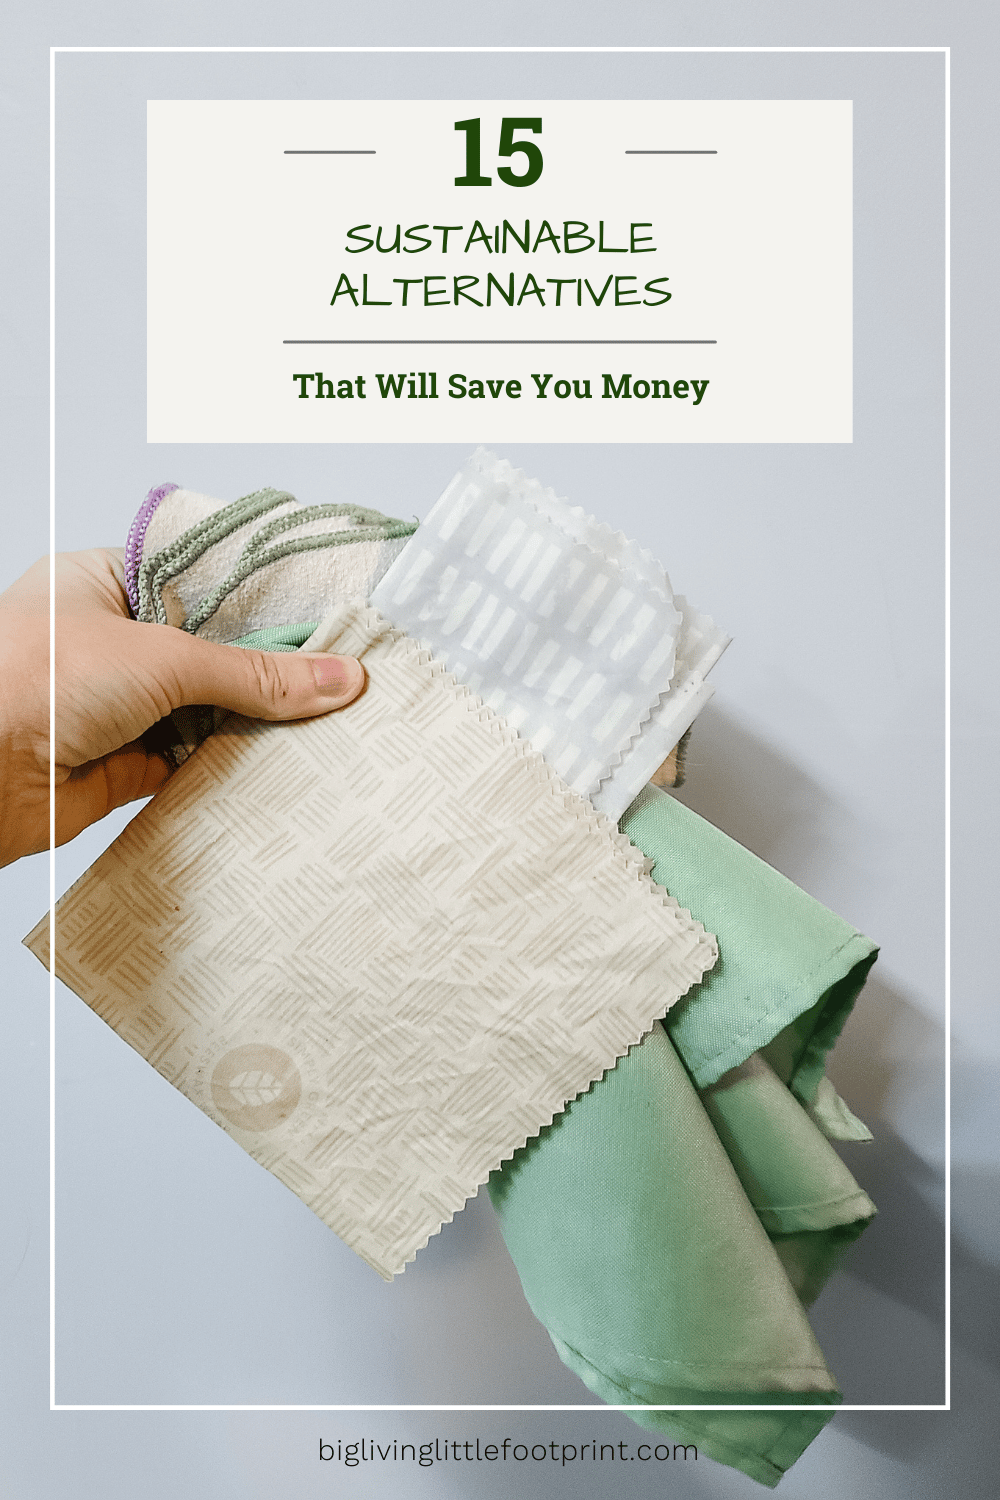 15 Sustainable Alternatives That Will Save You Money